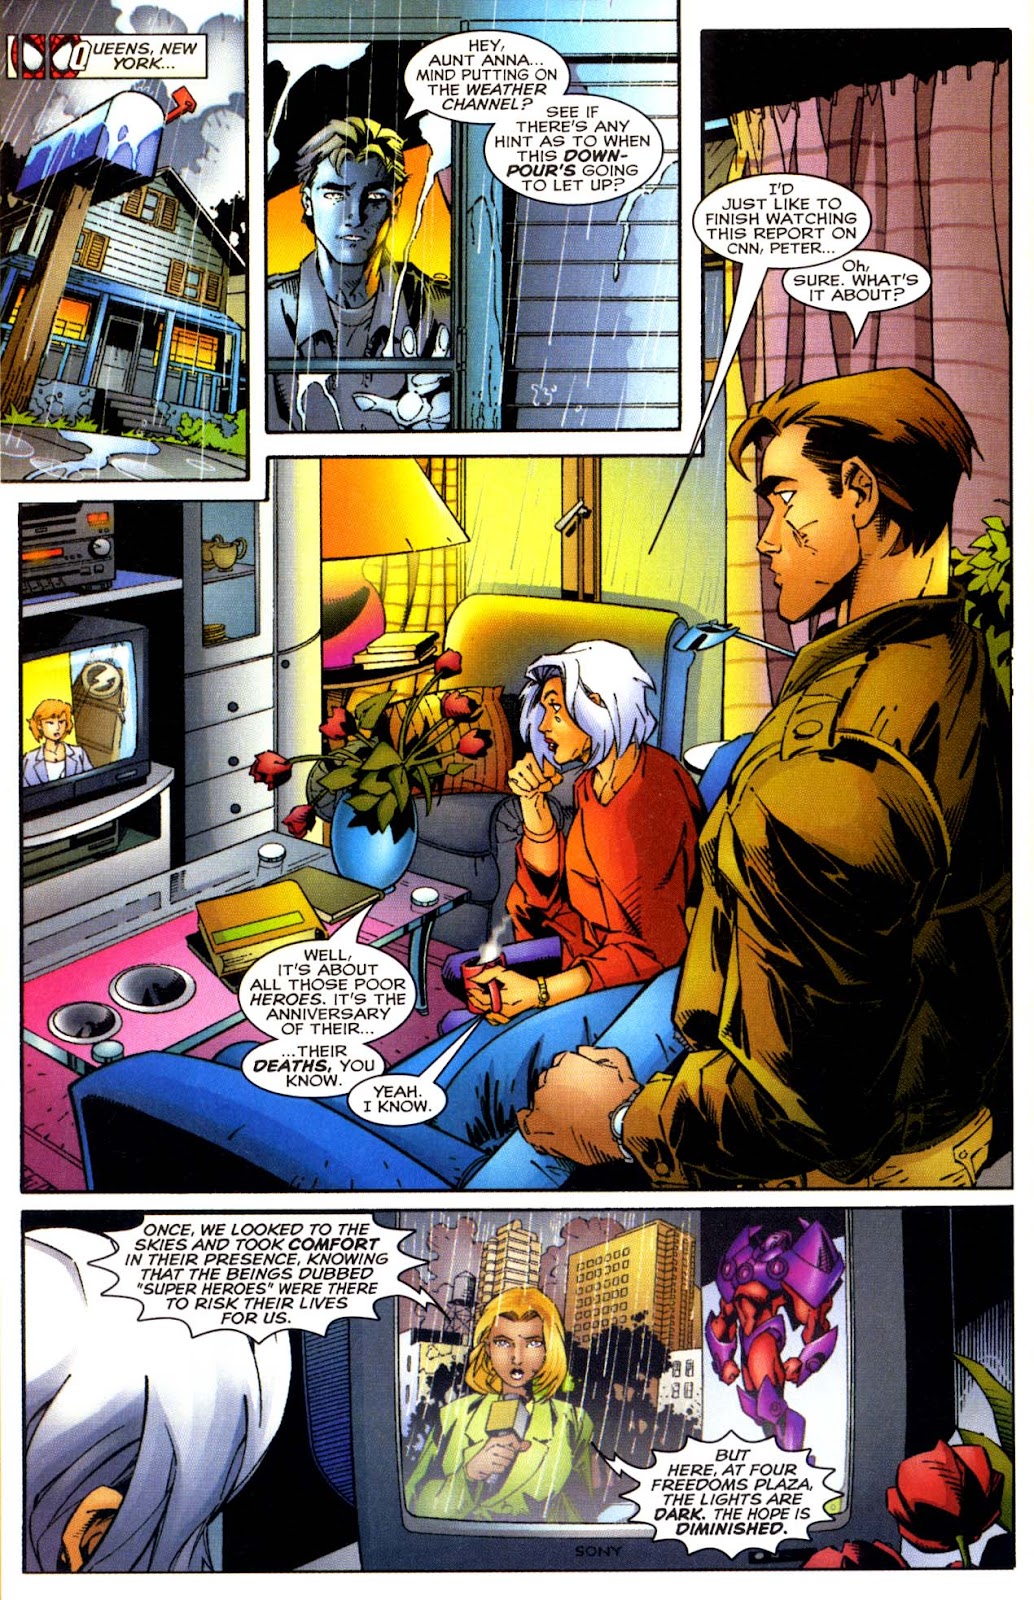 Heroes Reborn: The Return issue 1 - Page 13